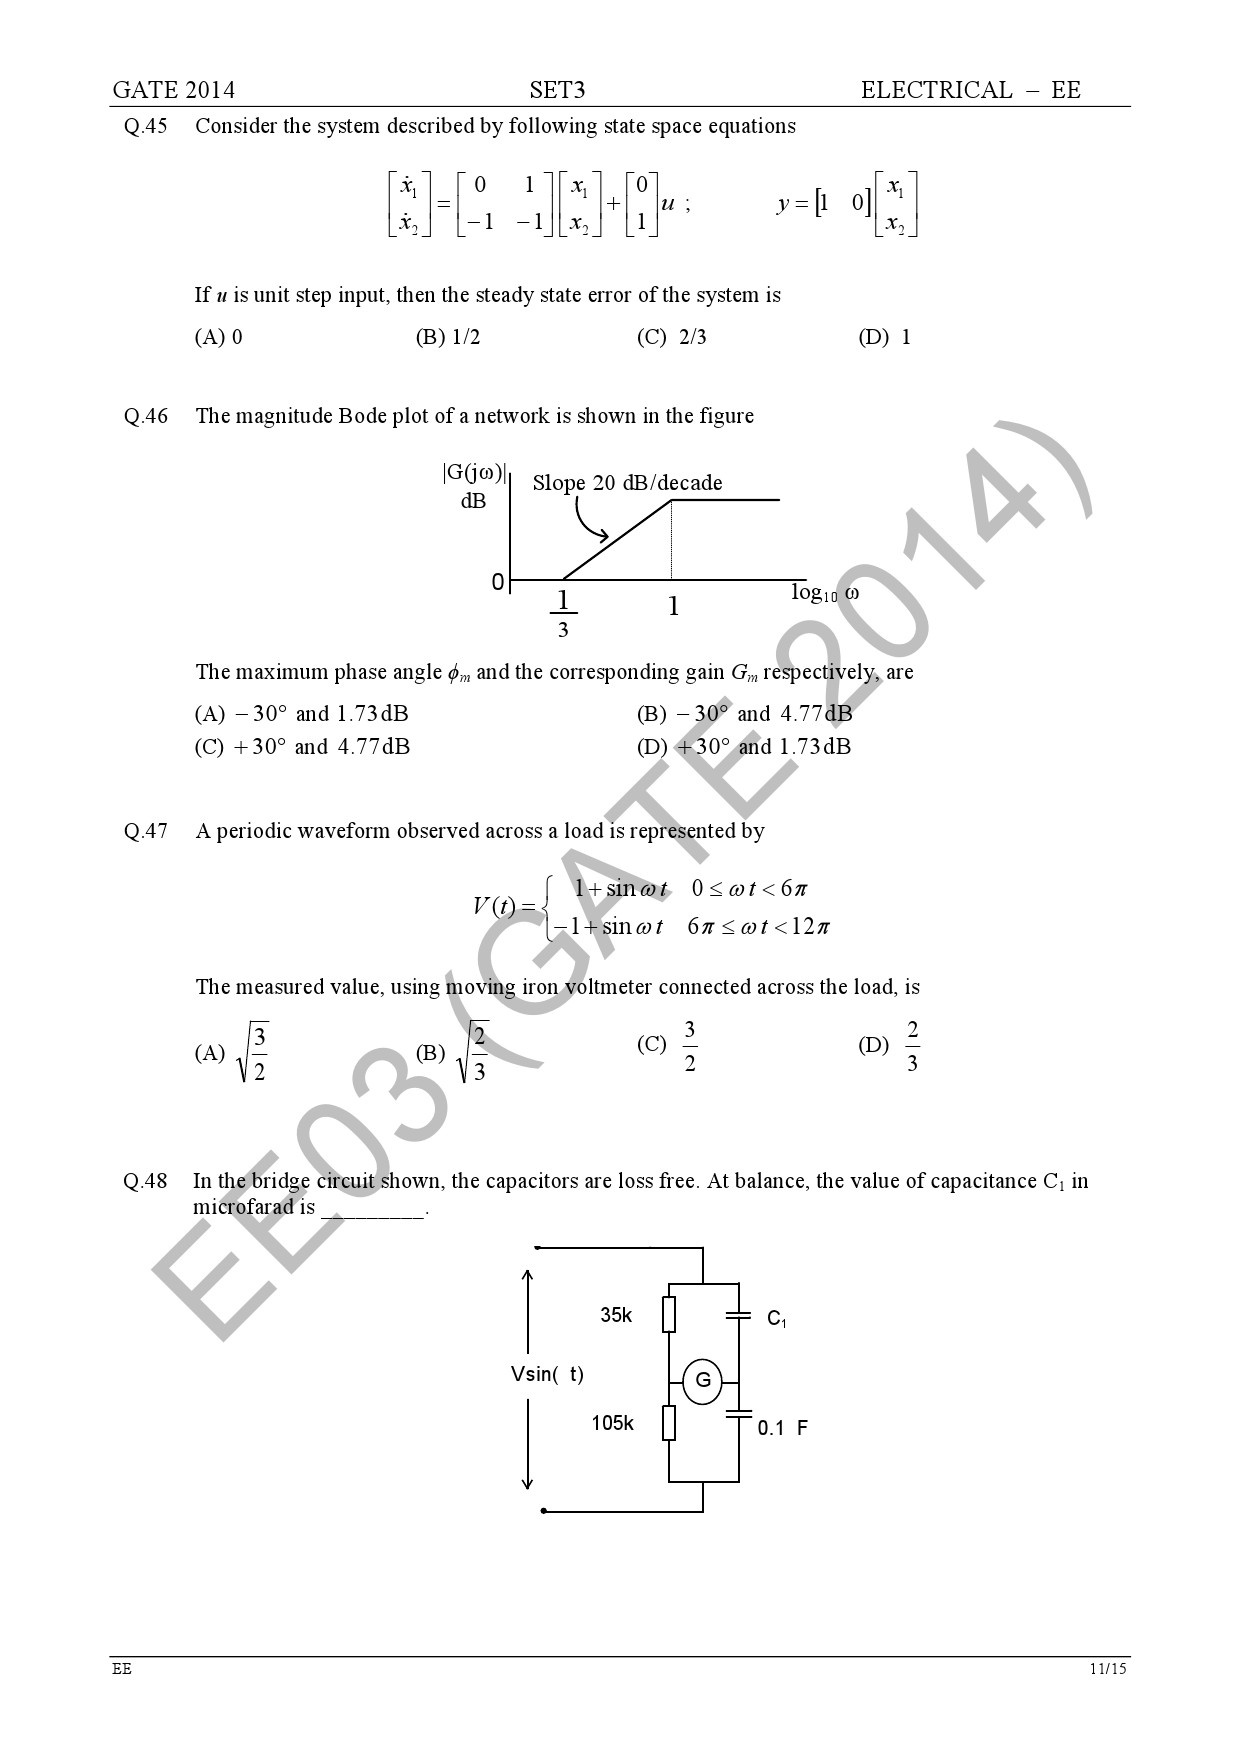 GATE Exam Question Paper 2014 Electrical Engineering Set 3 17